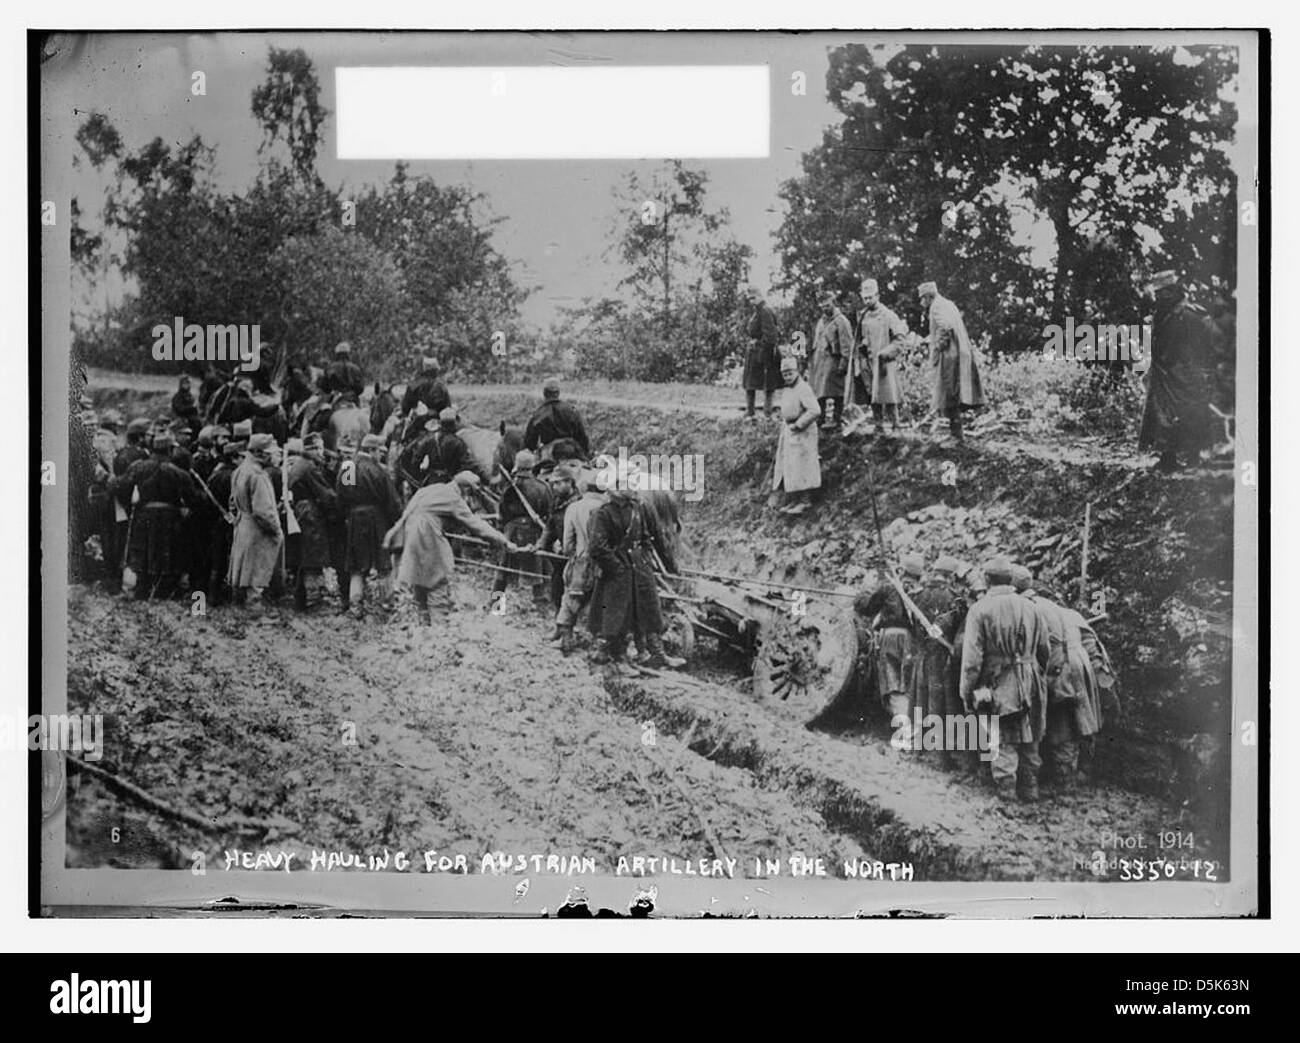 Heavy hauling for Austrian artillery in the north (LOC) Stock Photo